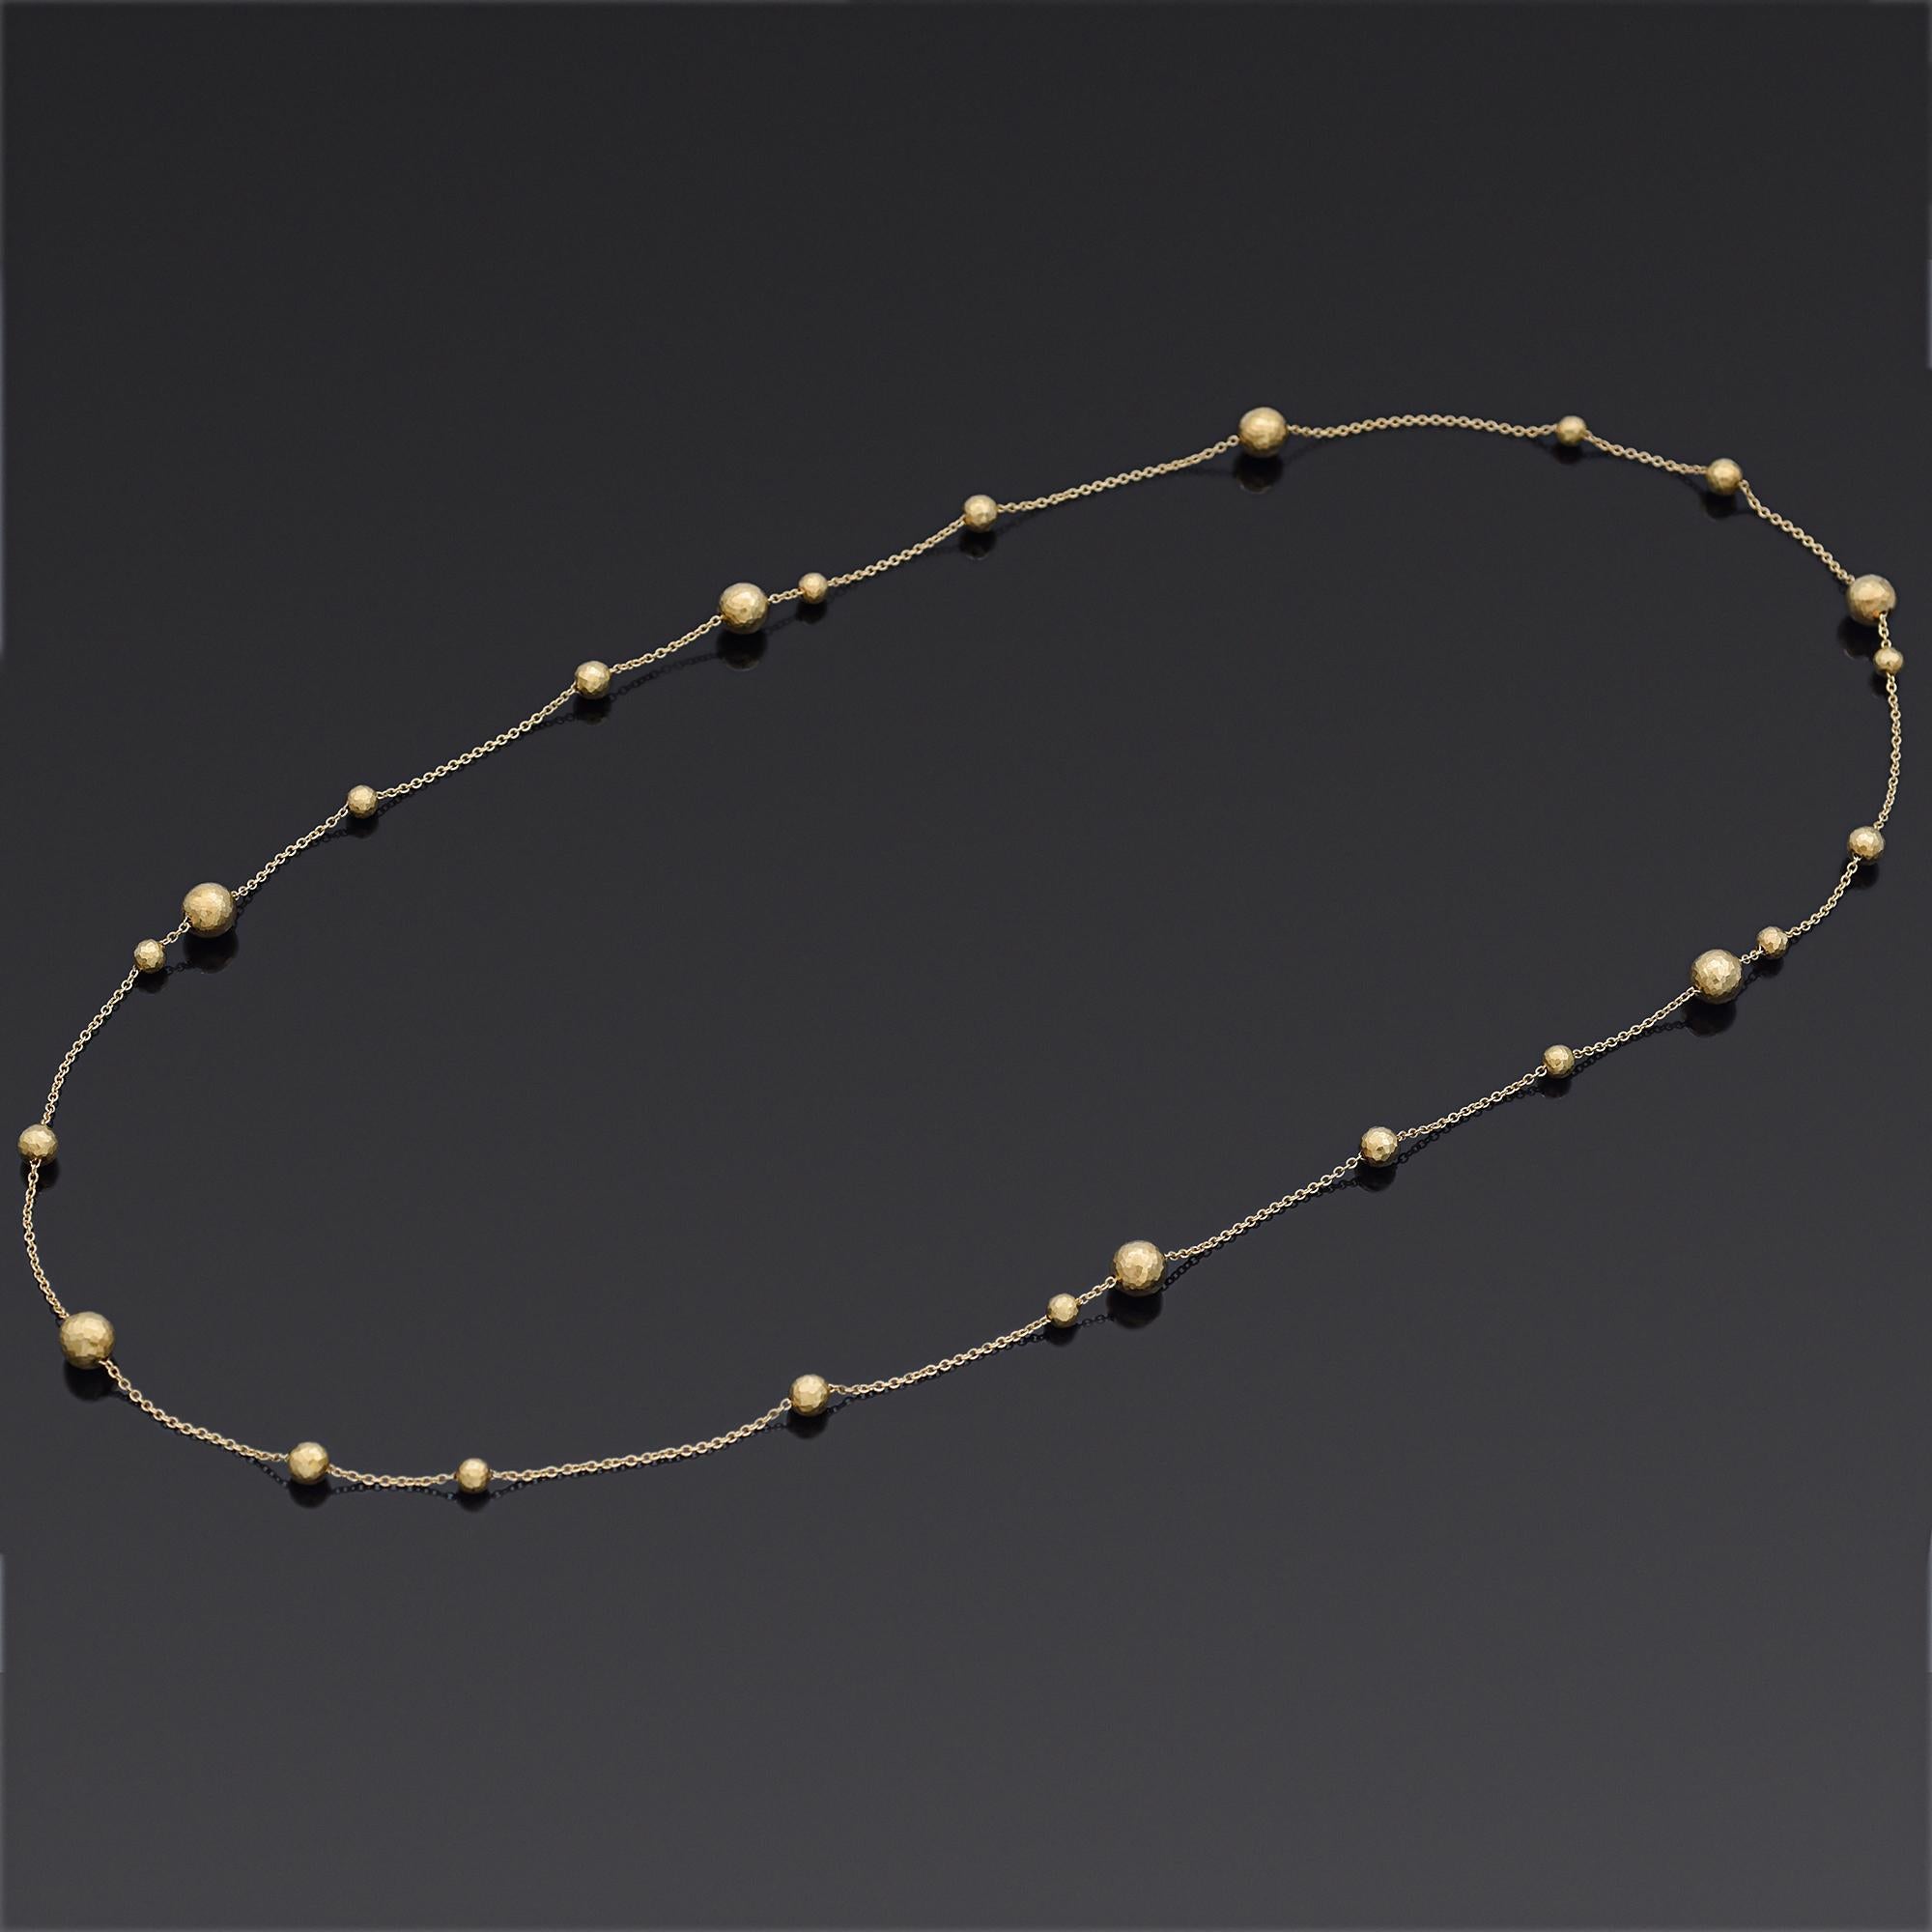 Weight: 11.8 Grams
Beads: 5-8 mm
Length: 30 Inches
Hallmark: T & Co. Paloma Picasso 750

ITEM #:BR-1078-101823-18